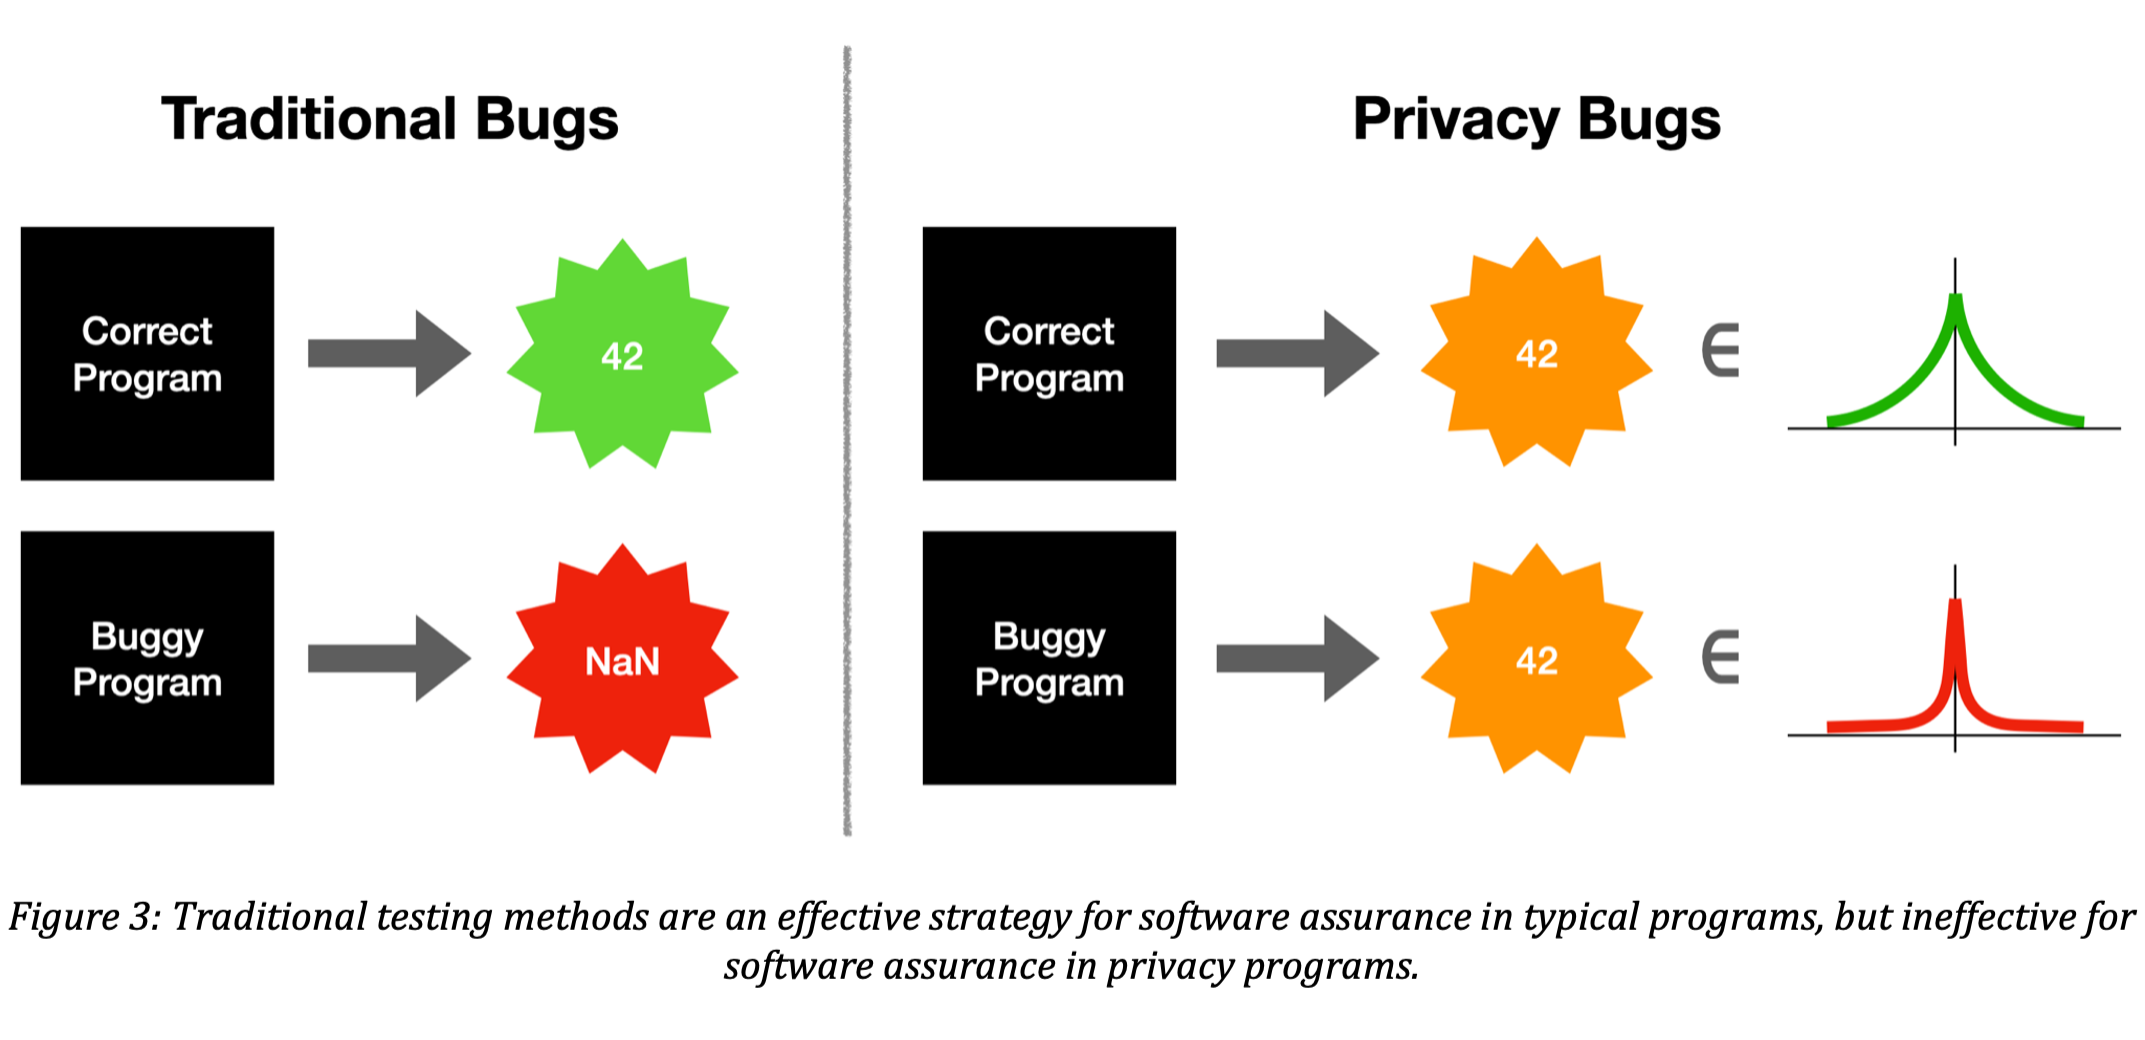 Figure 3: Traditional testing methods are an effective strategy for software assurance in typical programs, but ineffective for software assurance in privacy programs.